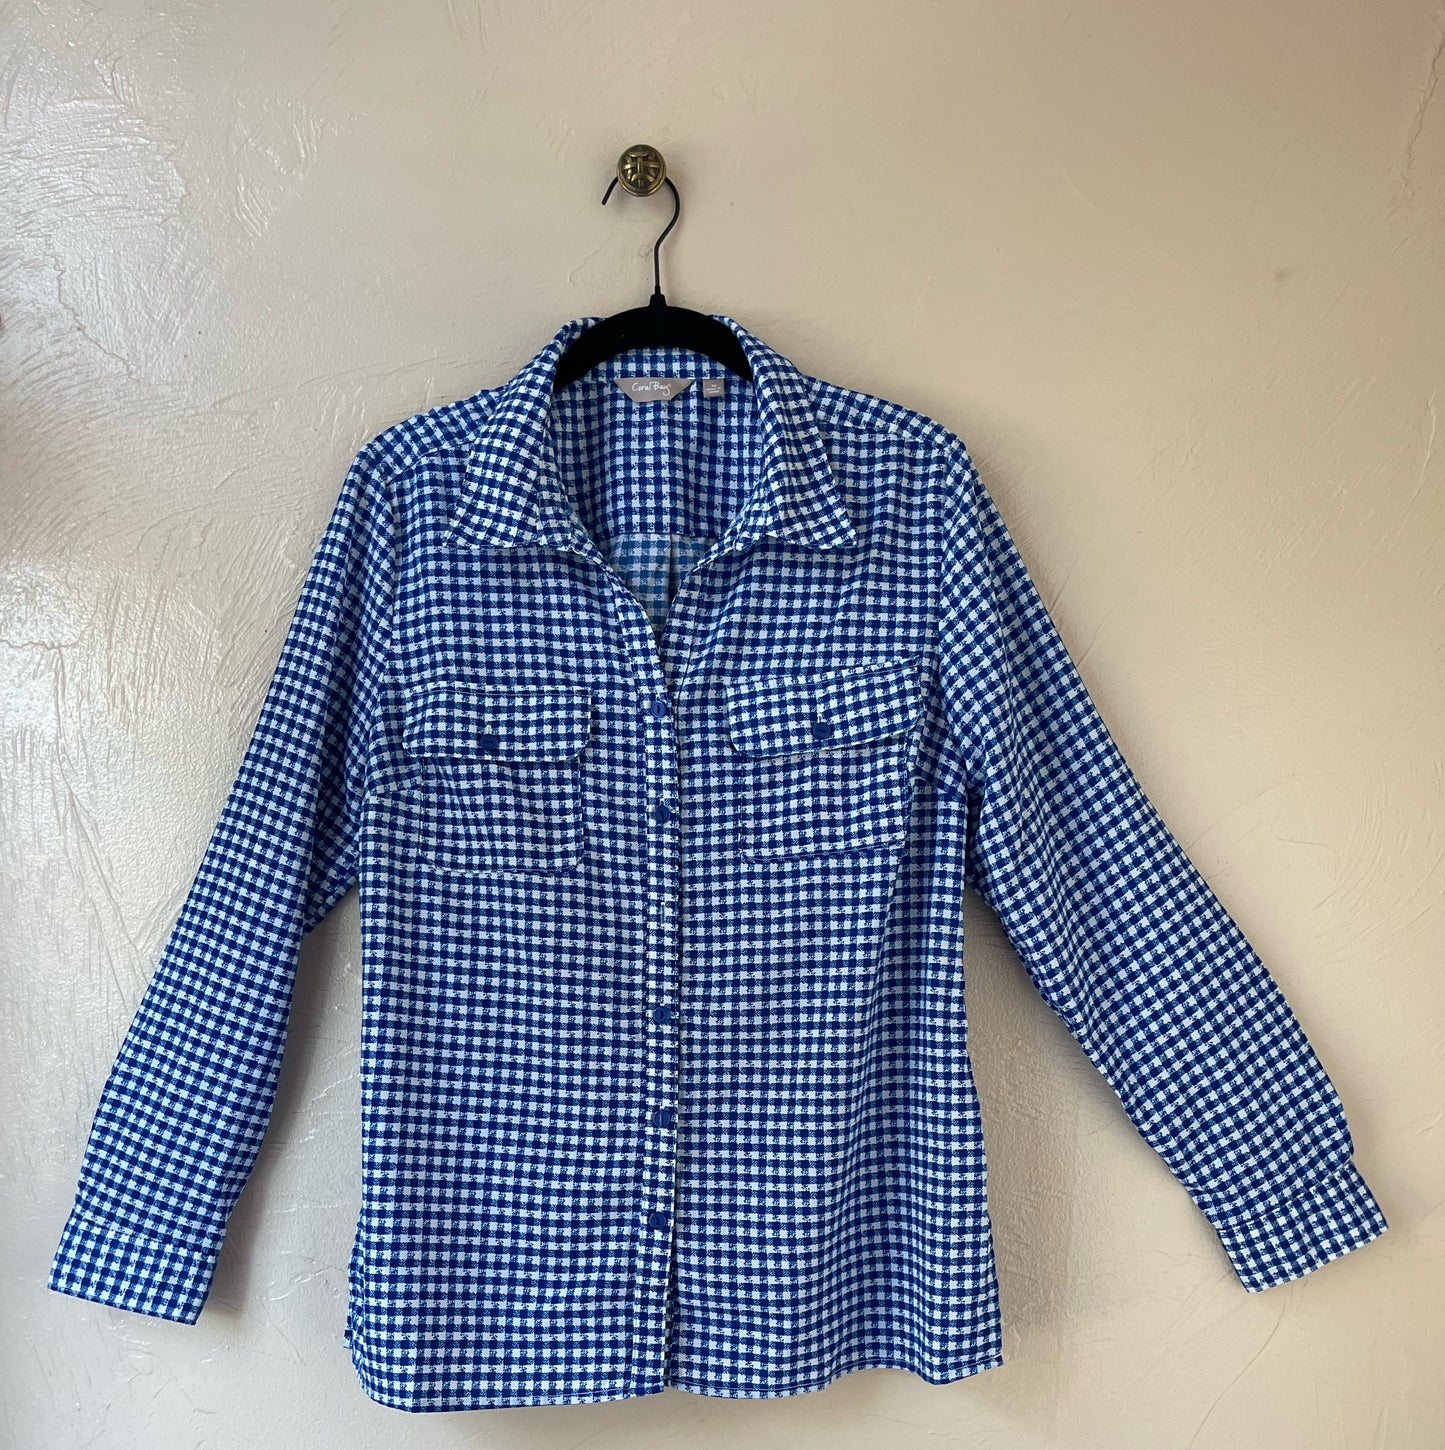 Gingham Button Down Top